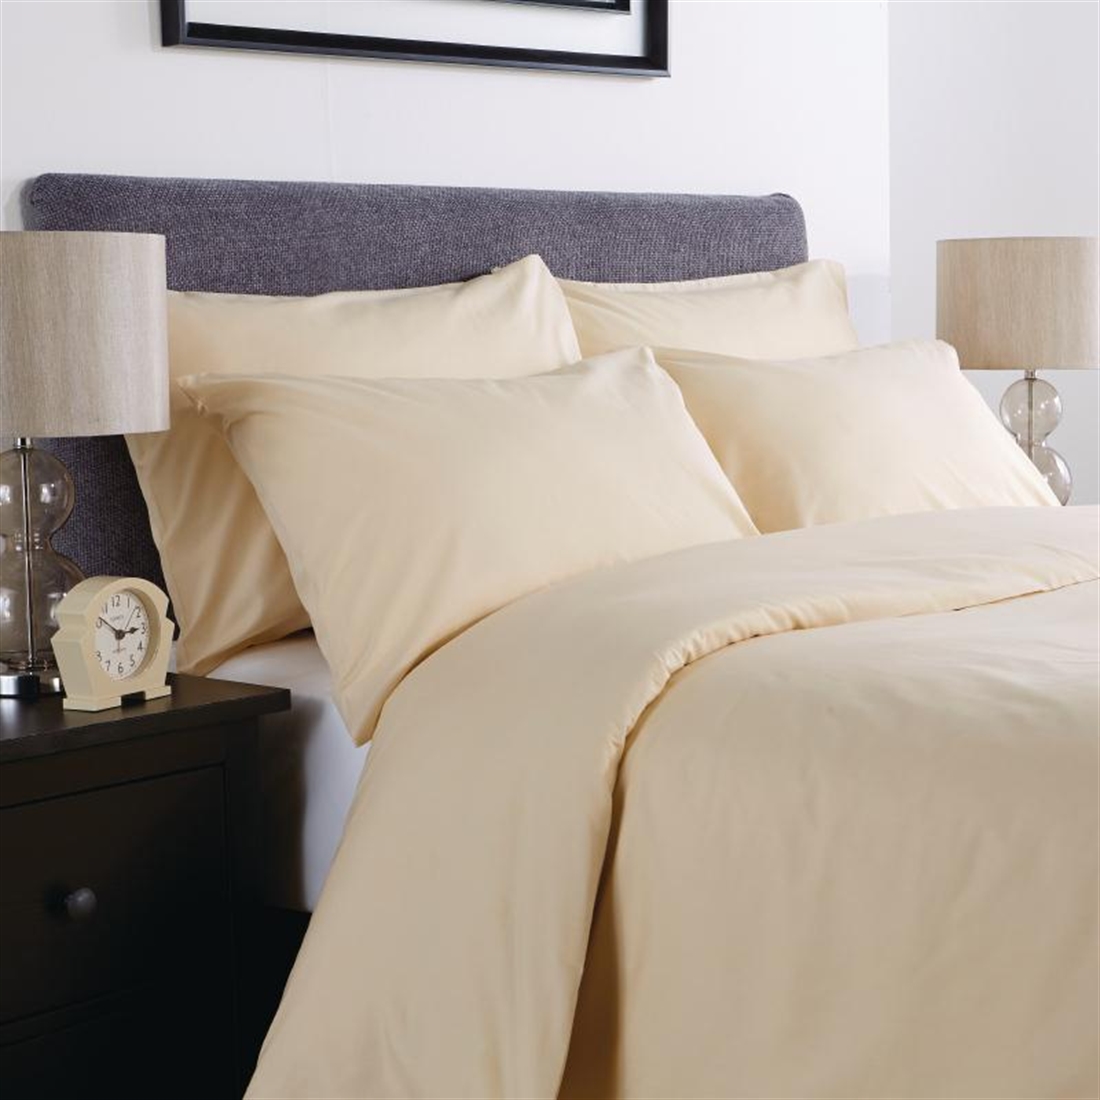 Mitre Comfort Percale Duvet Cover Oatmeal King Size